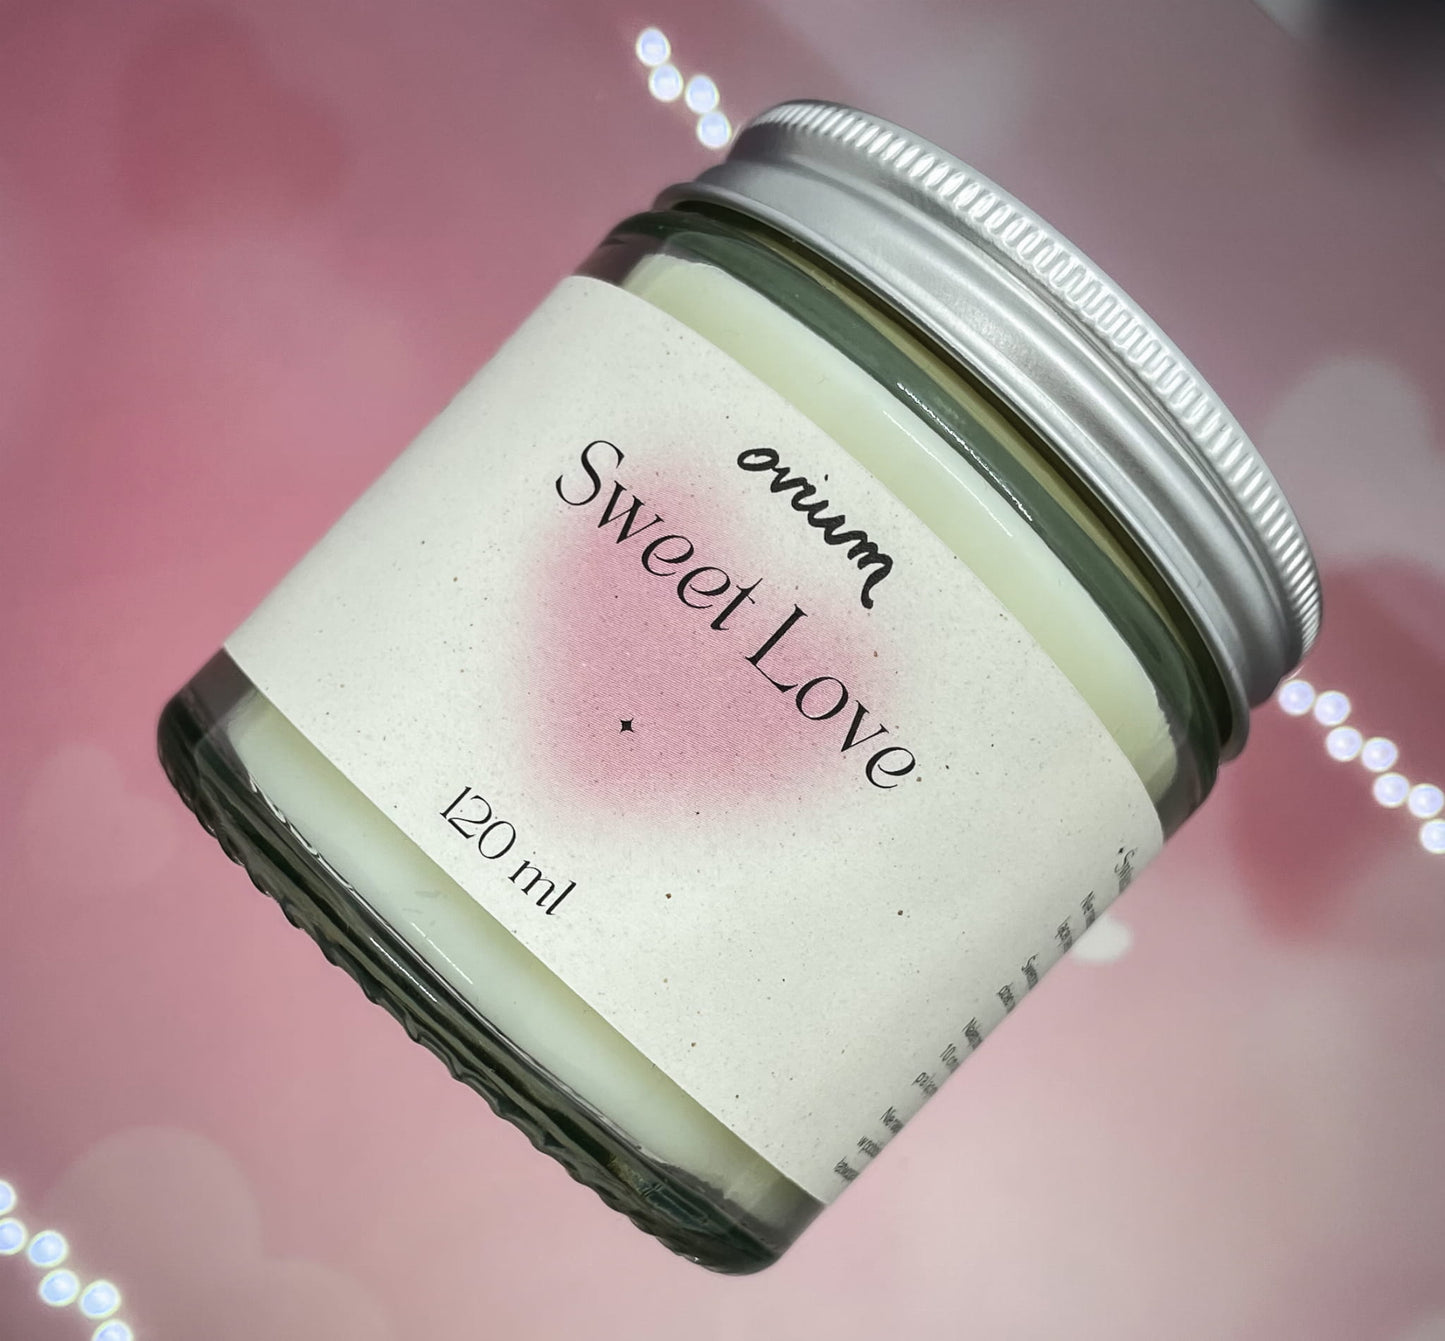 Ovium  Sweet Love Soy Candle | 120ml